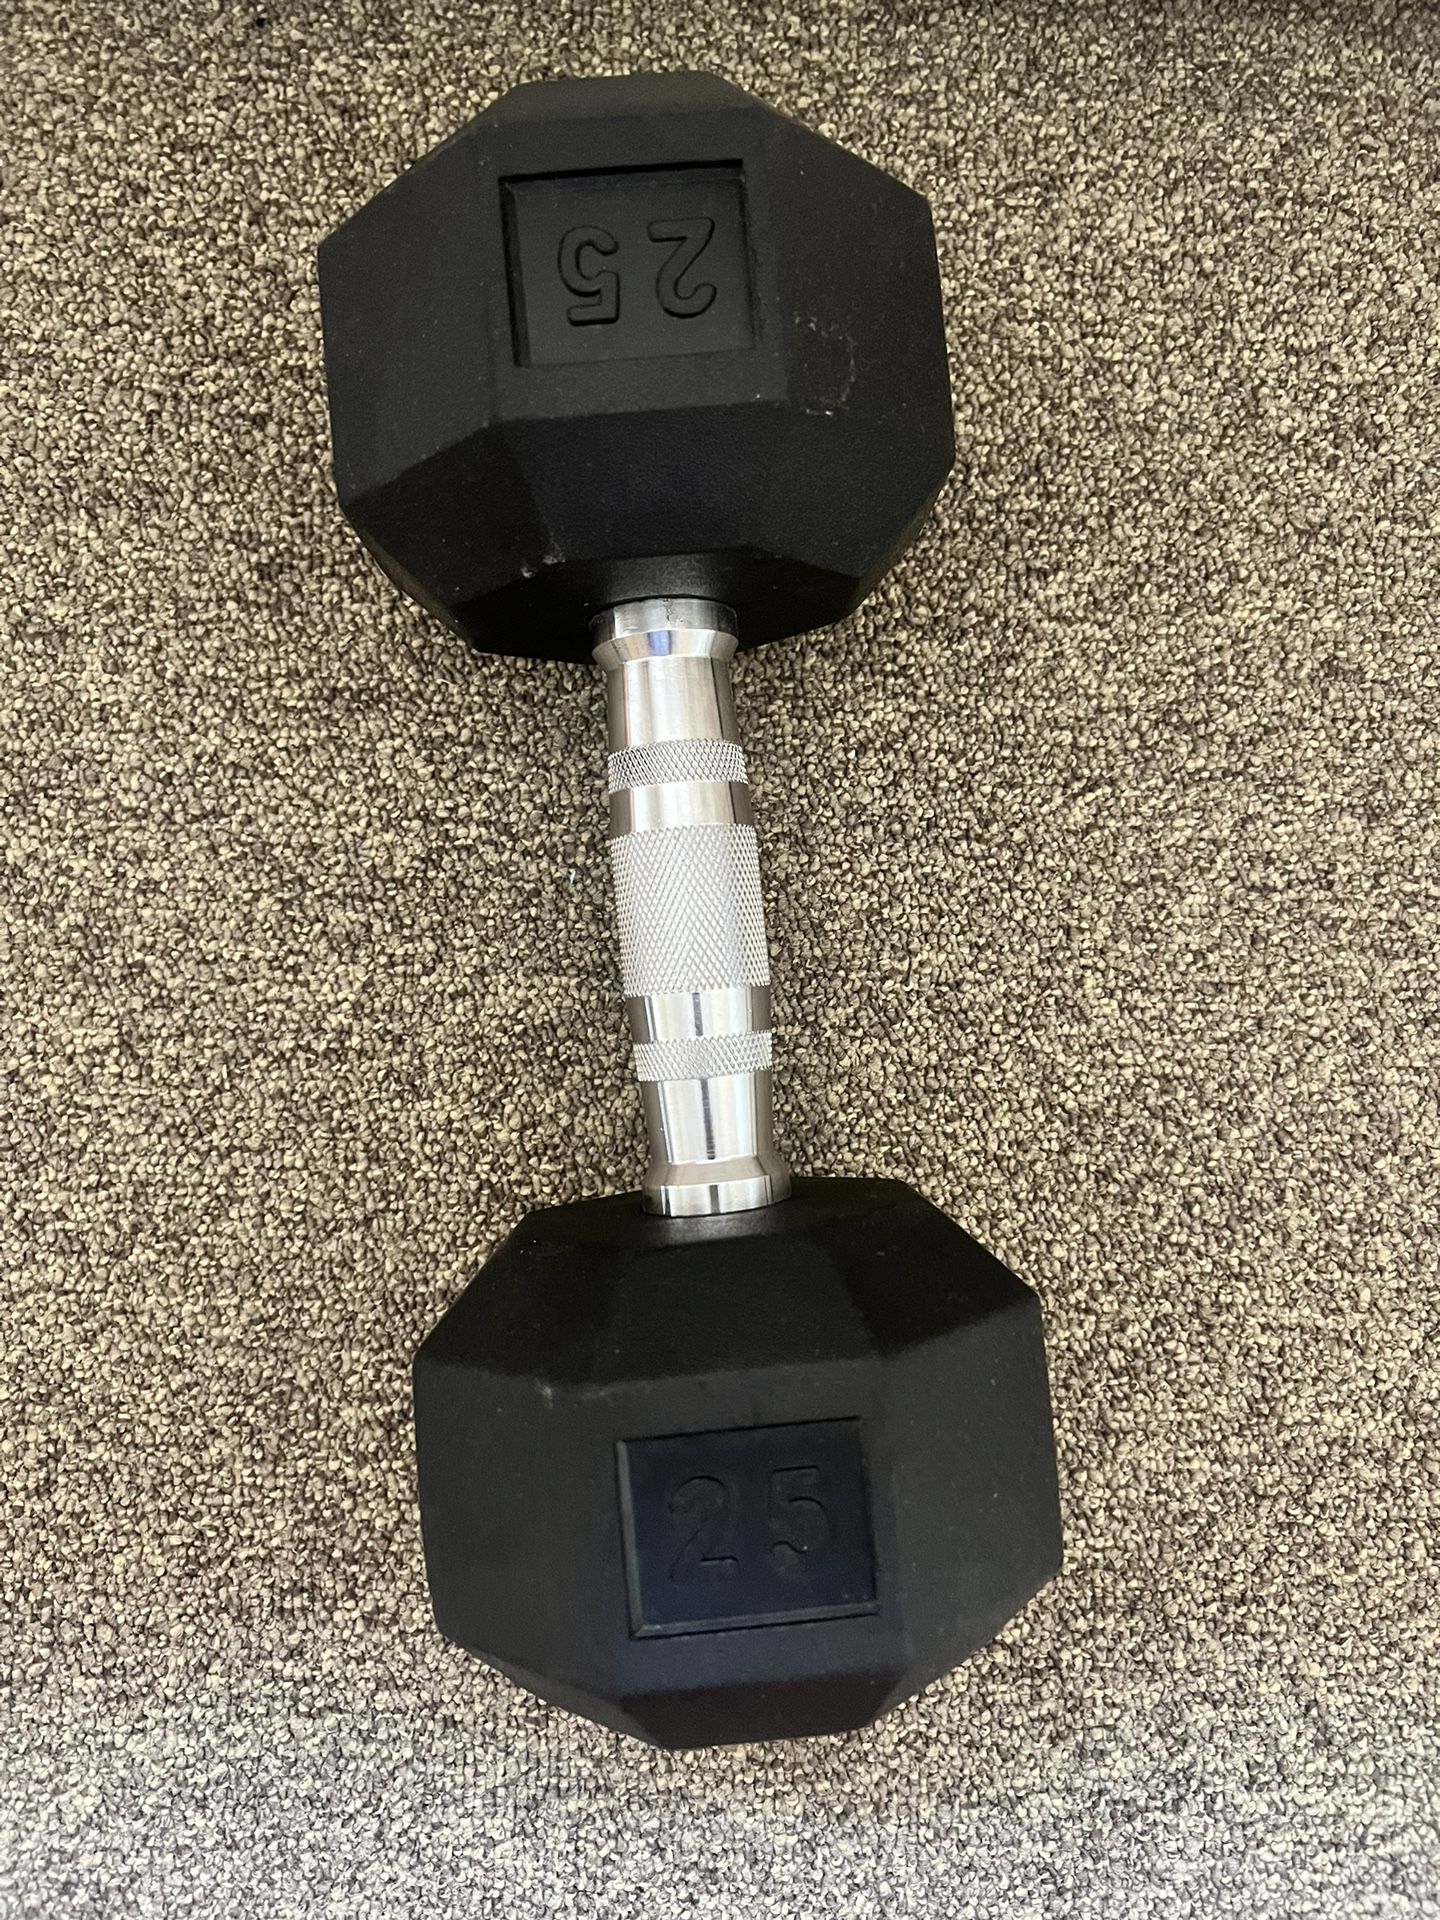 Weight (Dumbell)